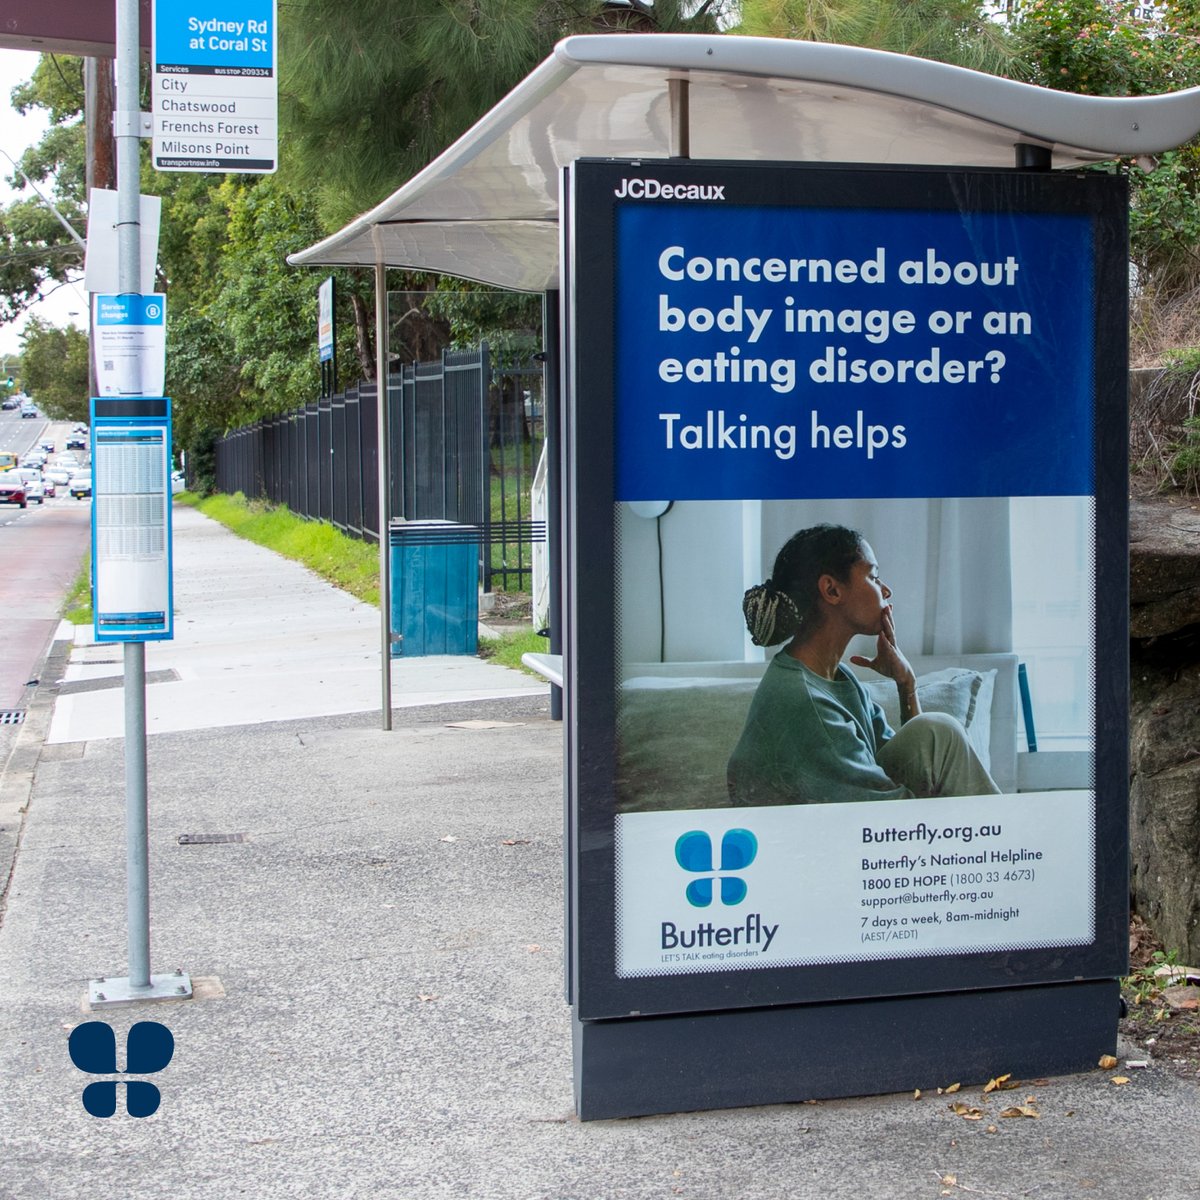 With the number of people impacted by eating disorders rising by 21% since 2012, community awareness has never been more important. A big thanks to @JCDecauxGlobal for their generous support in providing us with billboards across NSW, VIC & QLD to encourage help-seeking.💙🦋